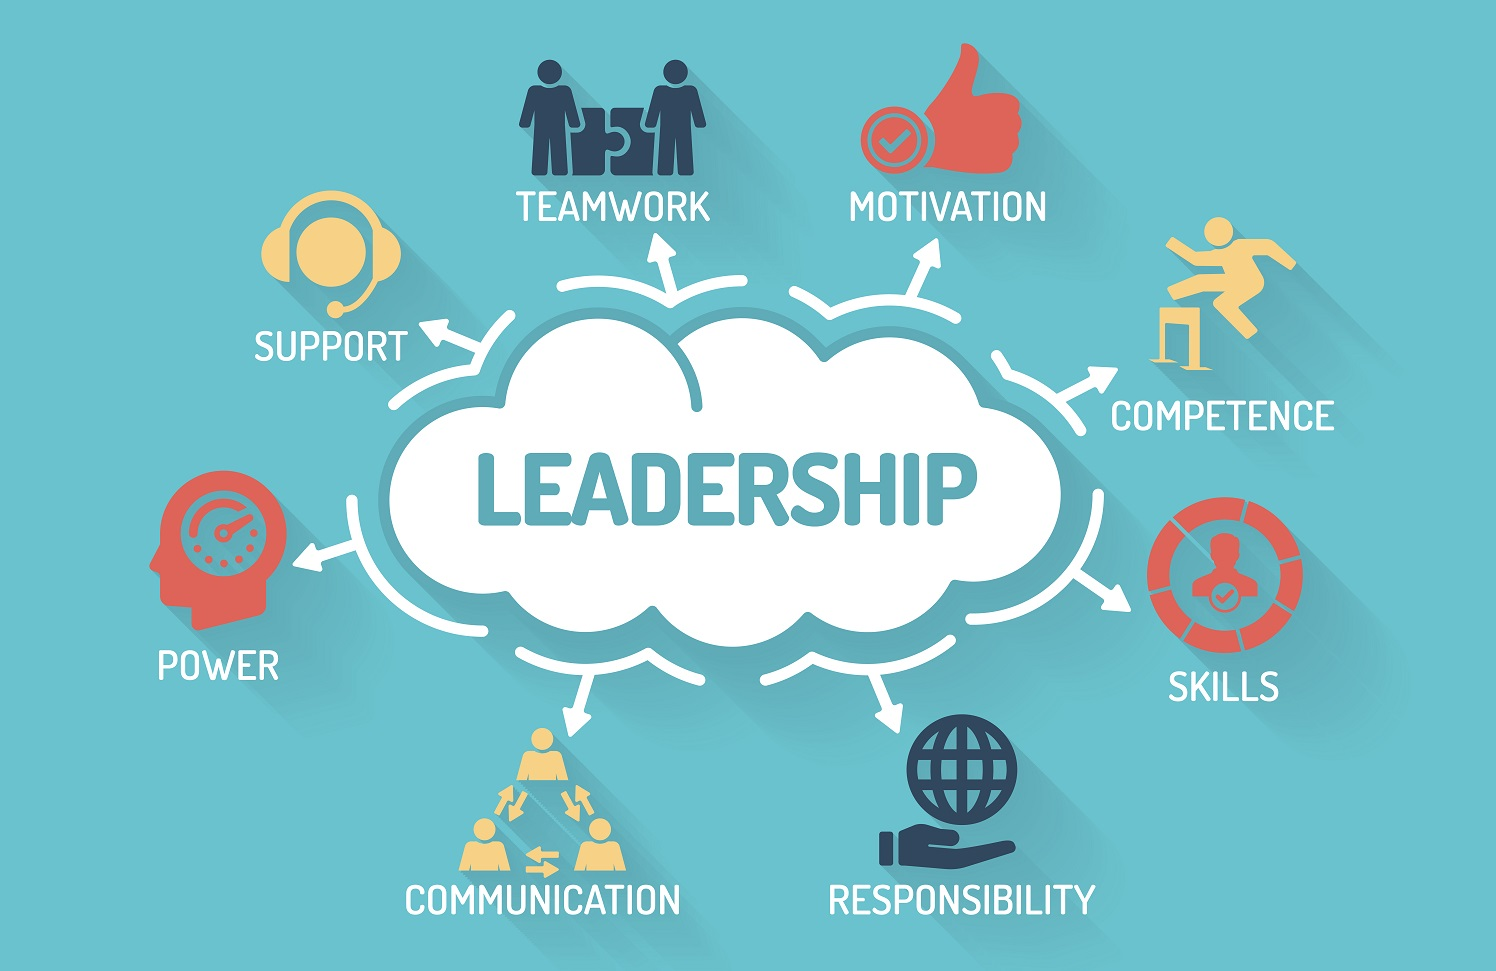 Graphic outlining the components of leadership. Includes skills, responsibility, support and others.